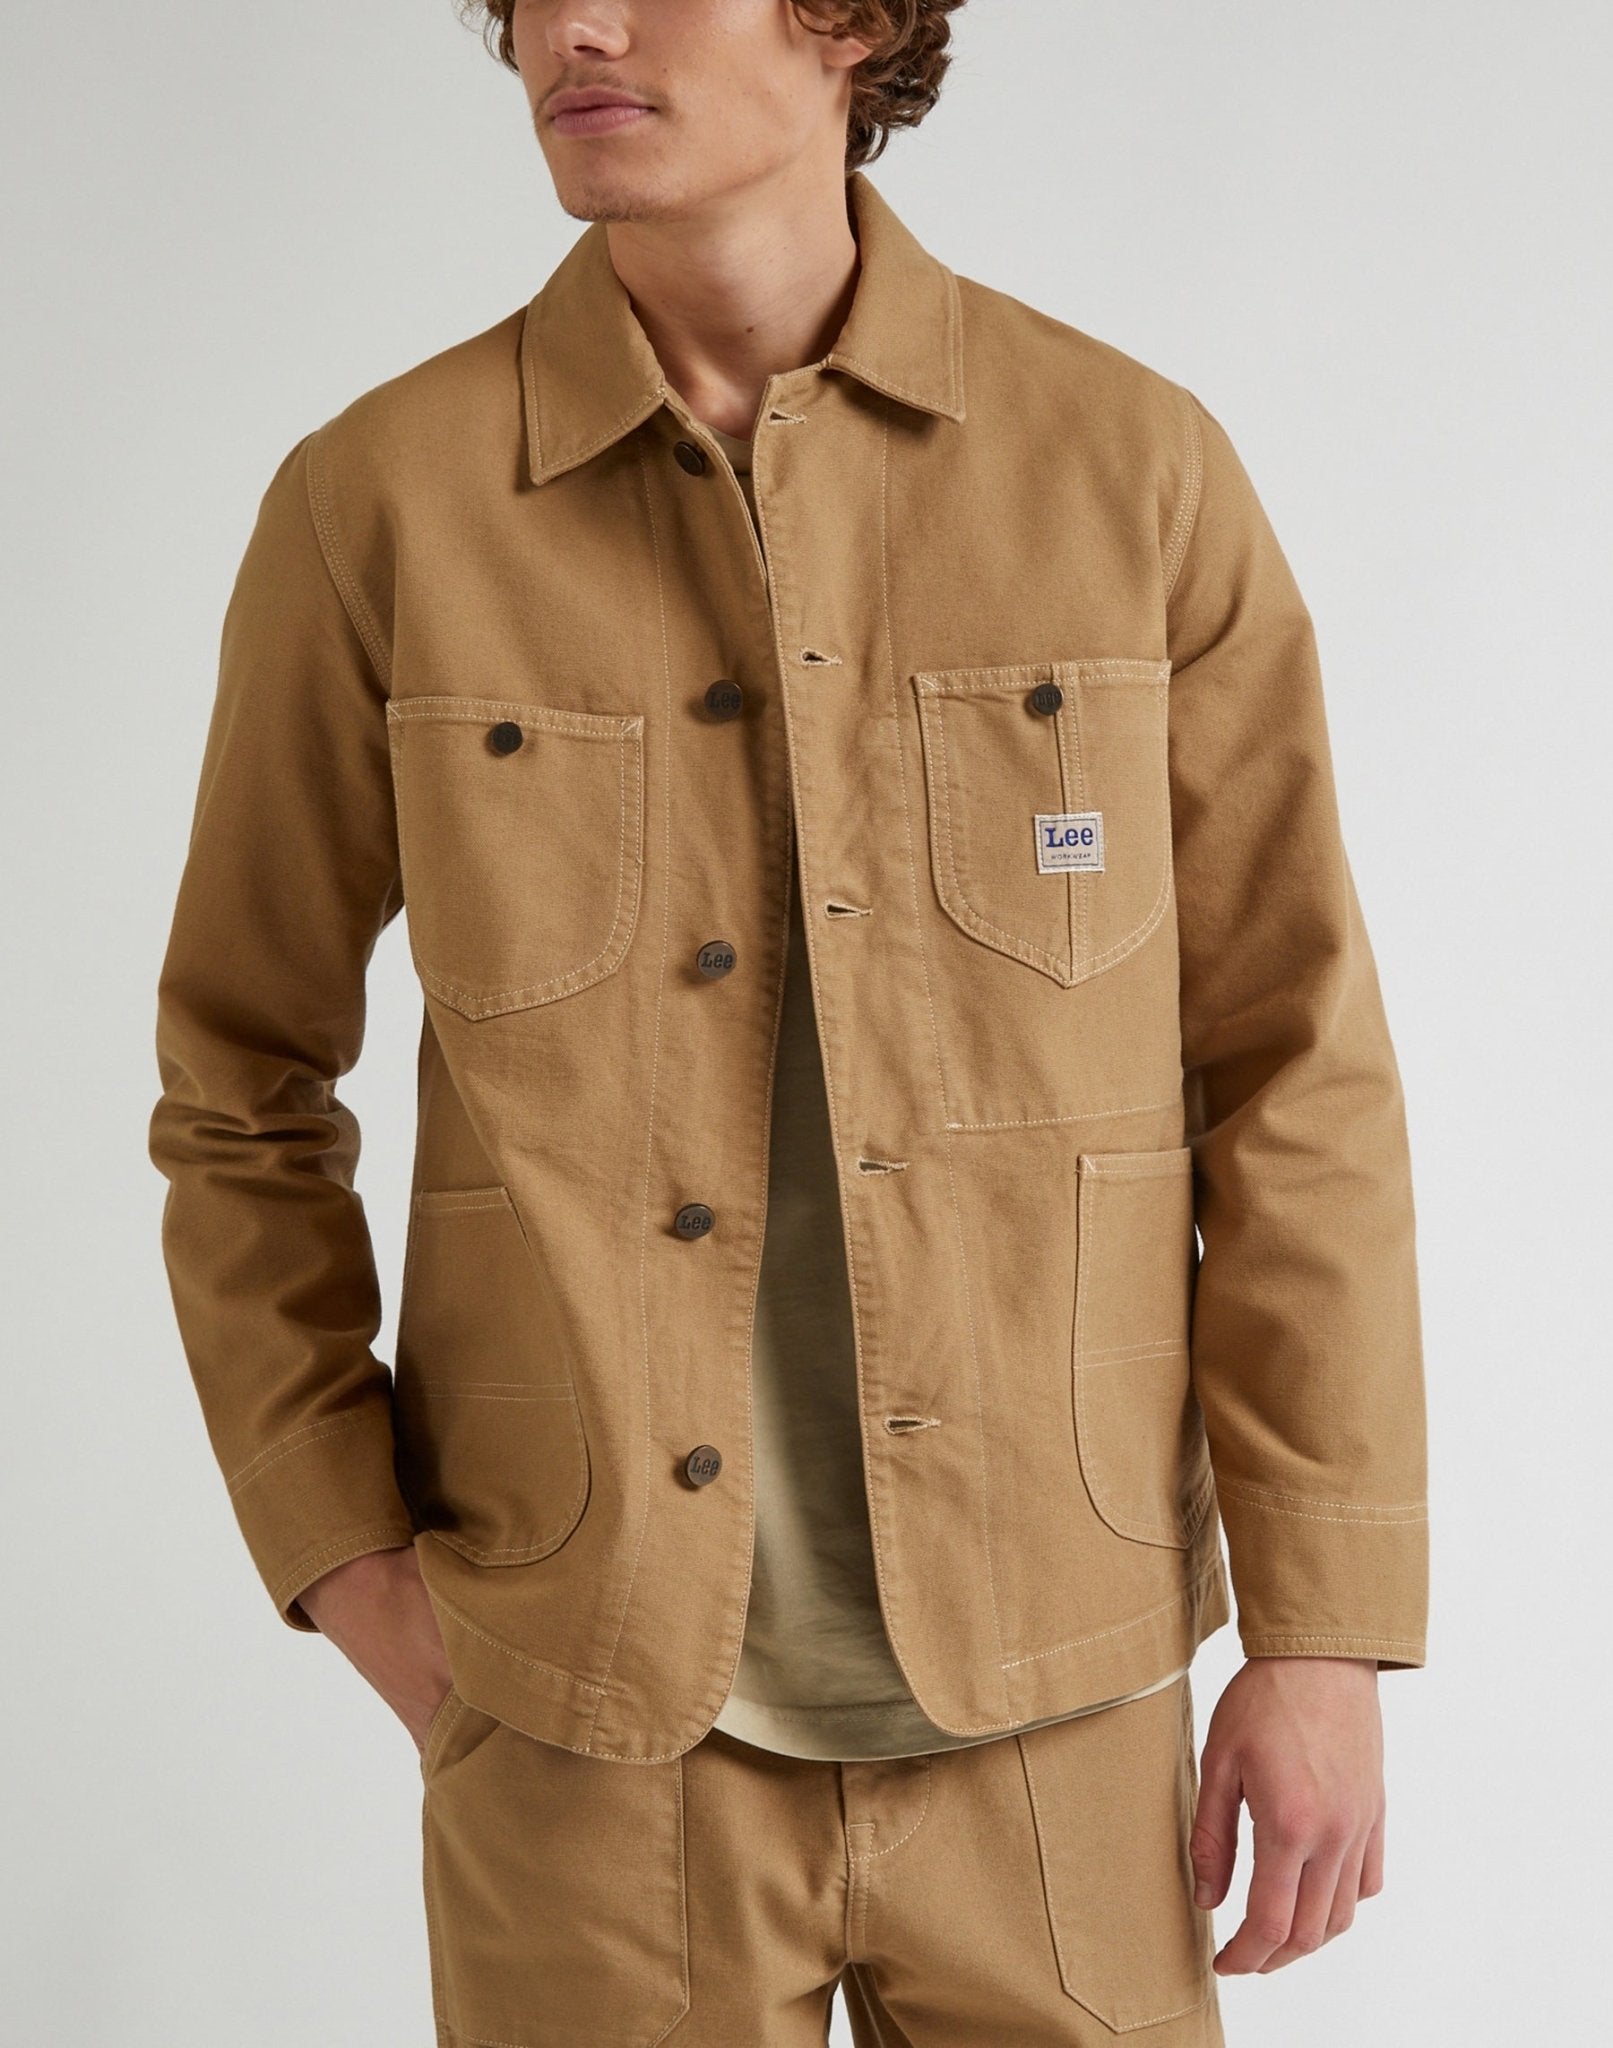 Loco Jacket in Clay